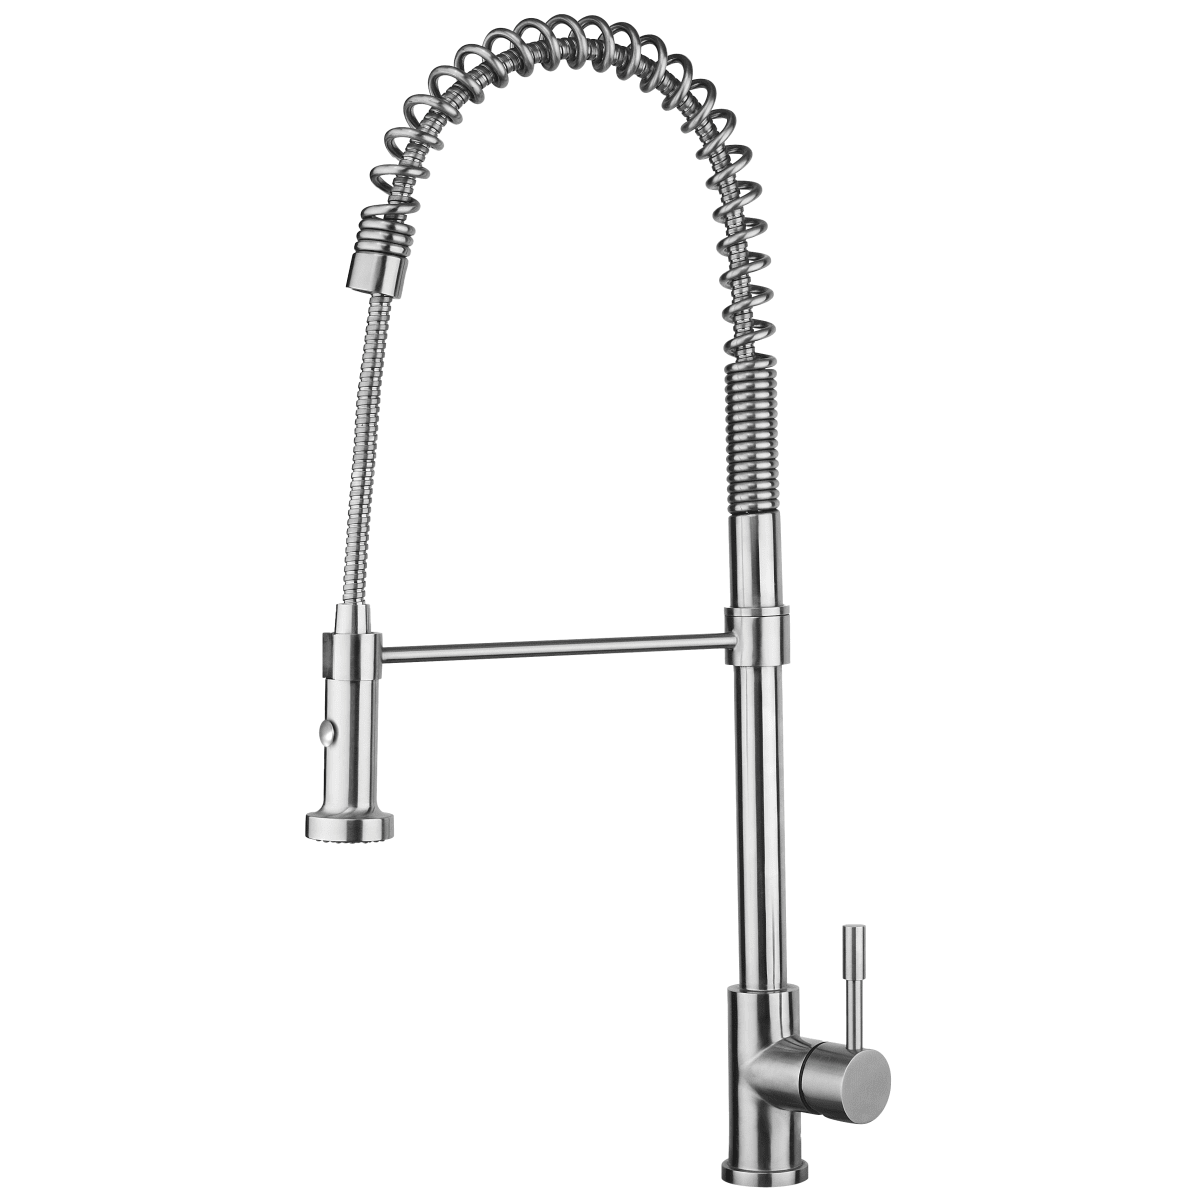 Whitehaus Whs1634 Sk Pss Polished Stainless Steel Waterhaus